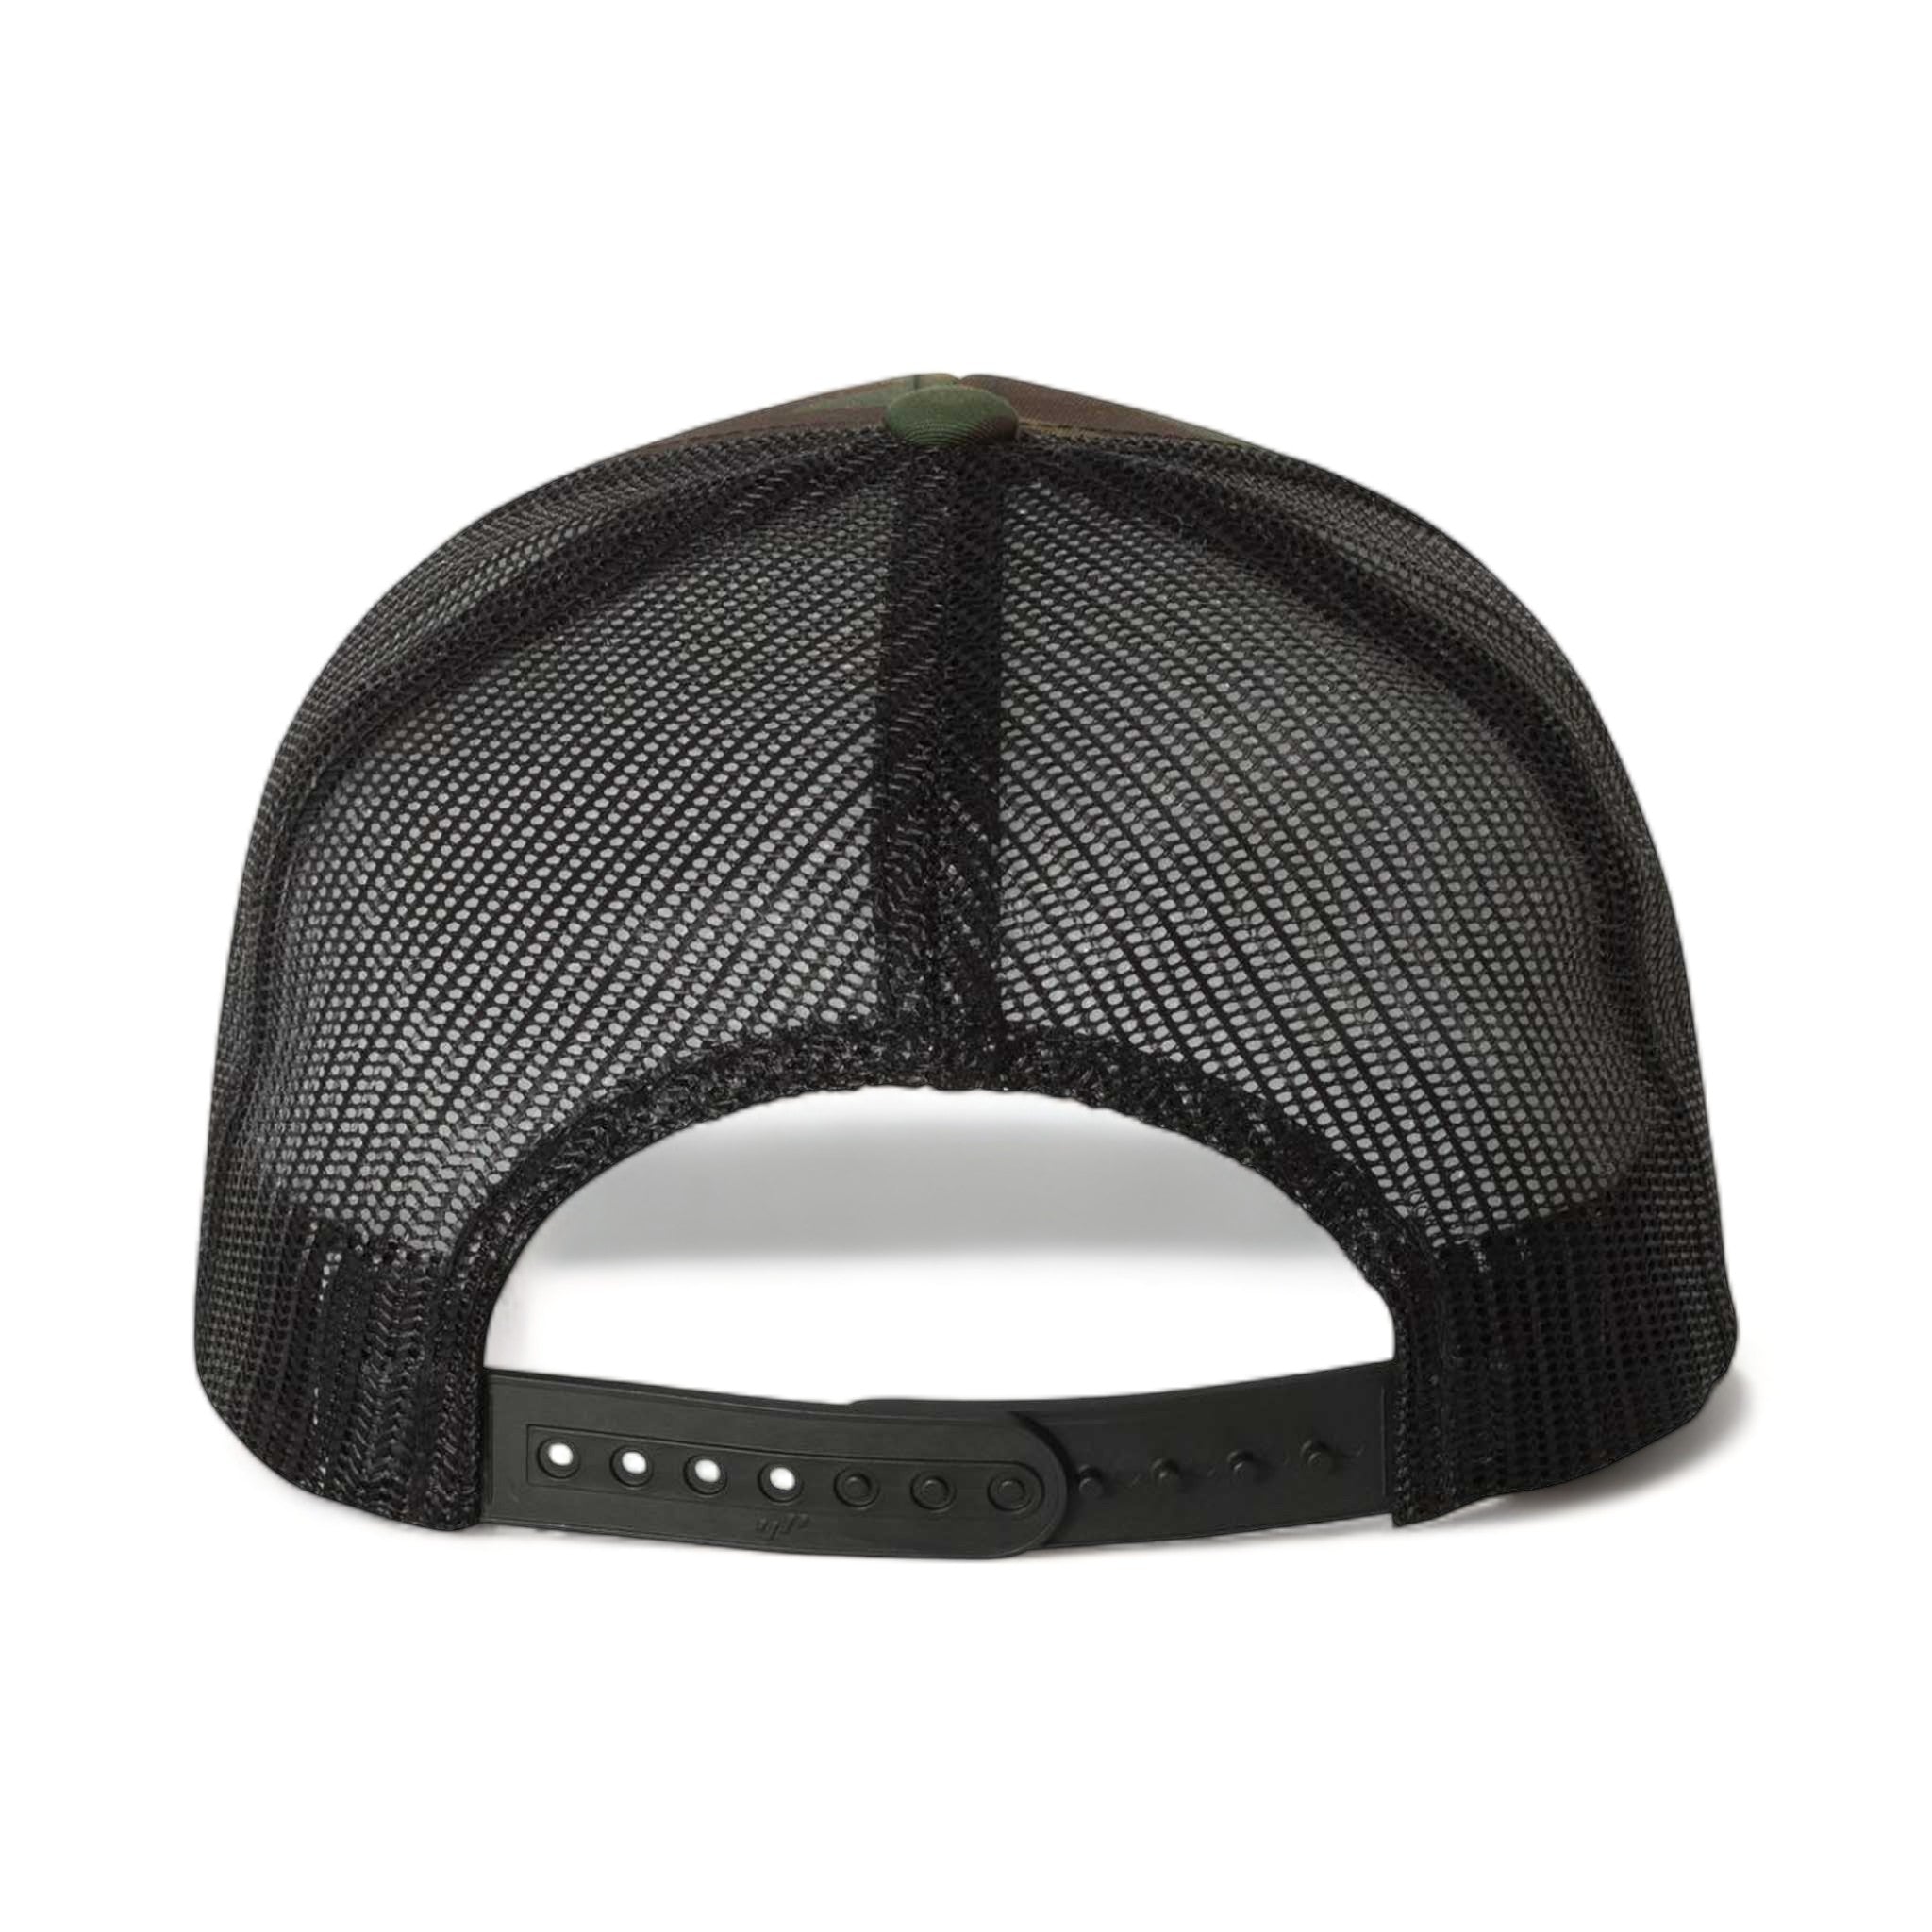 Back view of YP Classics 6606 custom hat in green camo and black